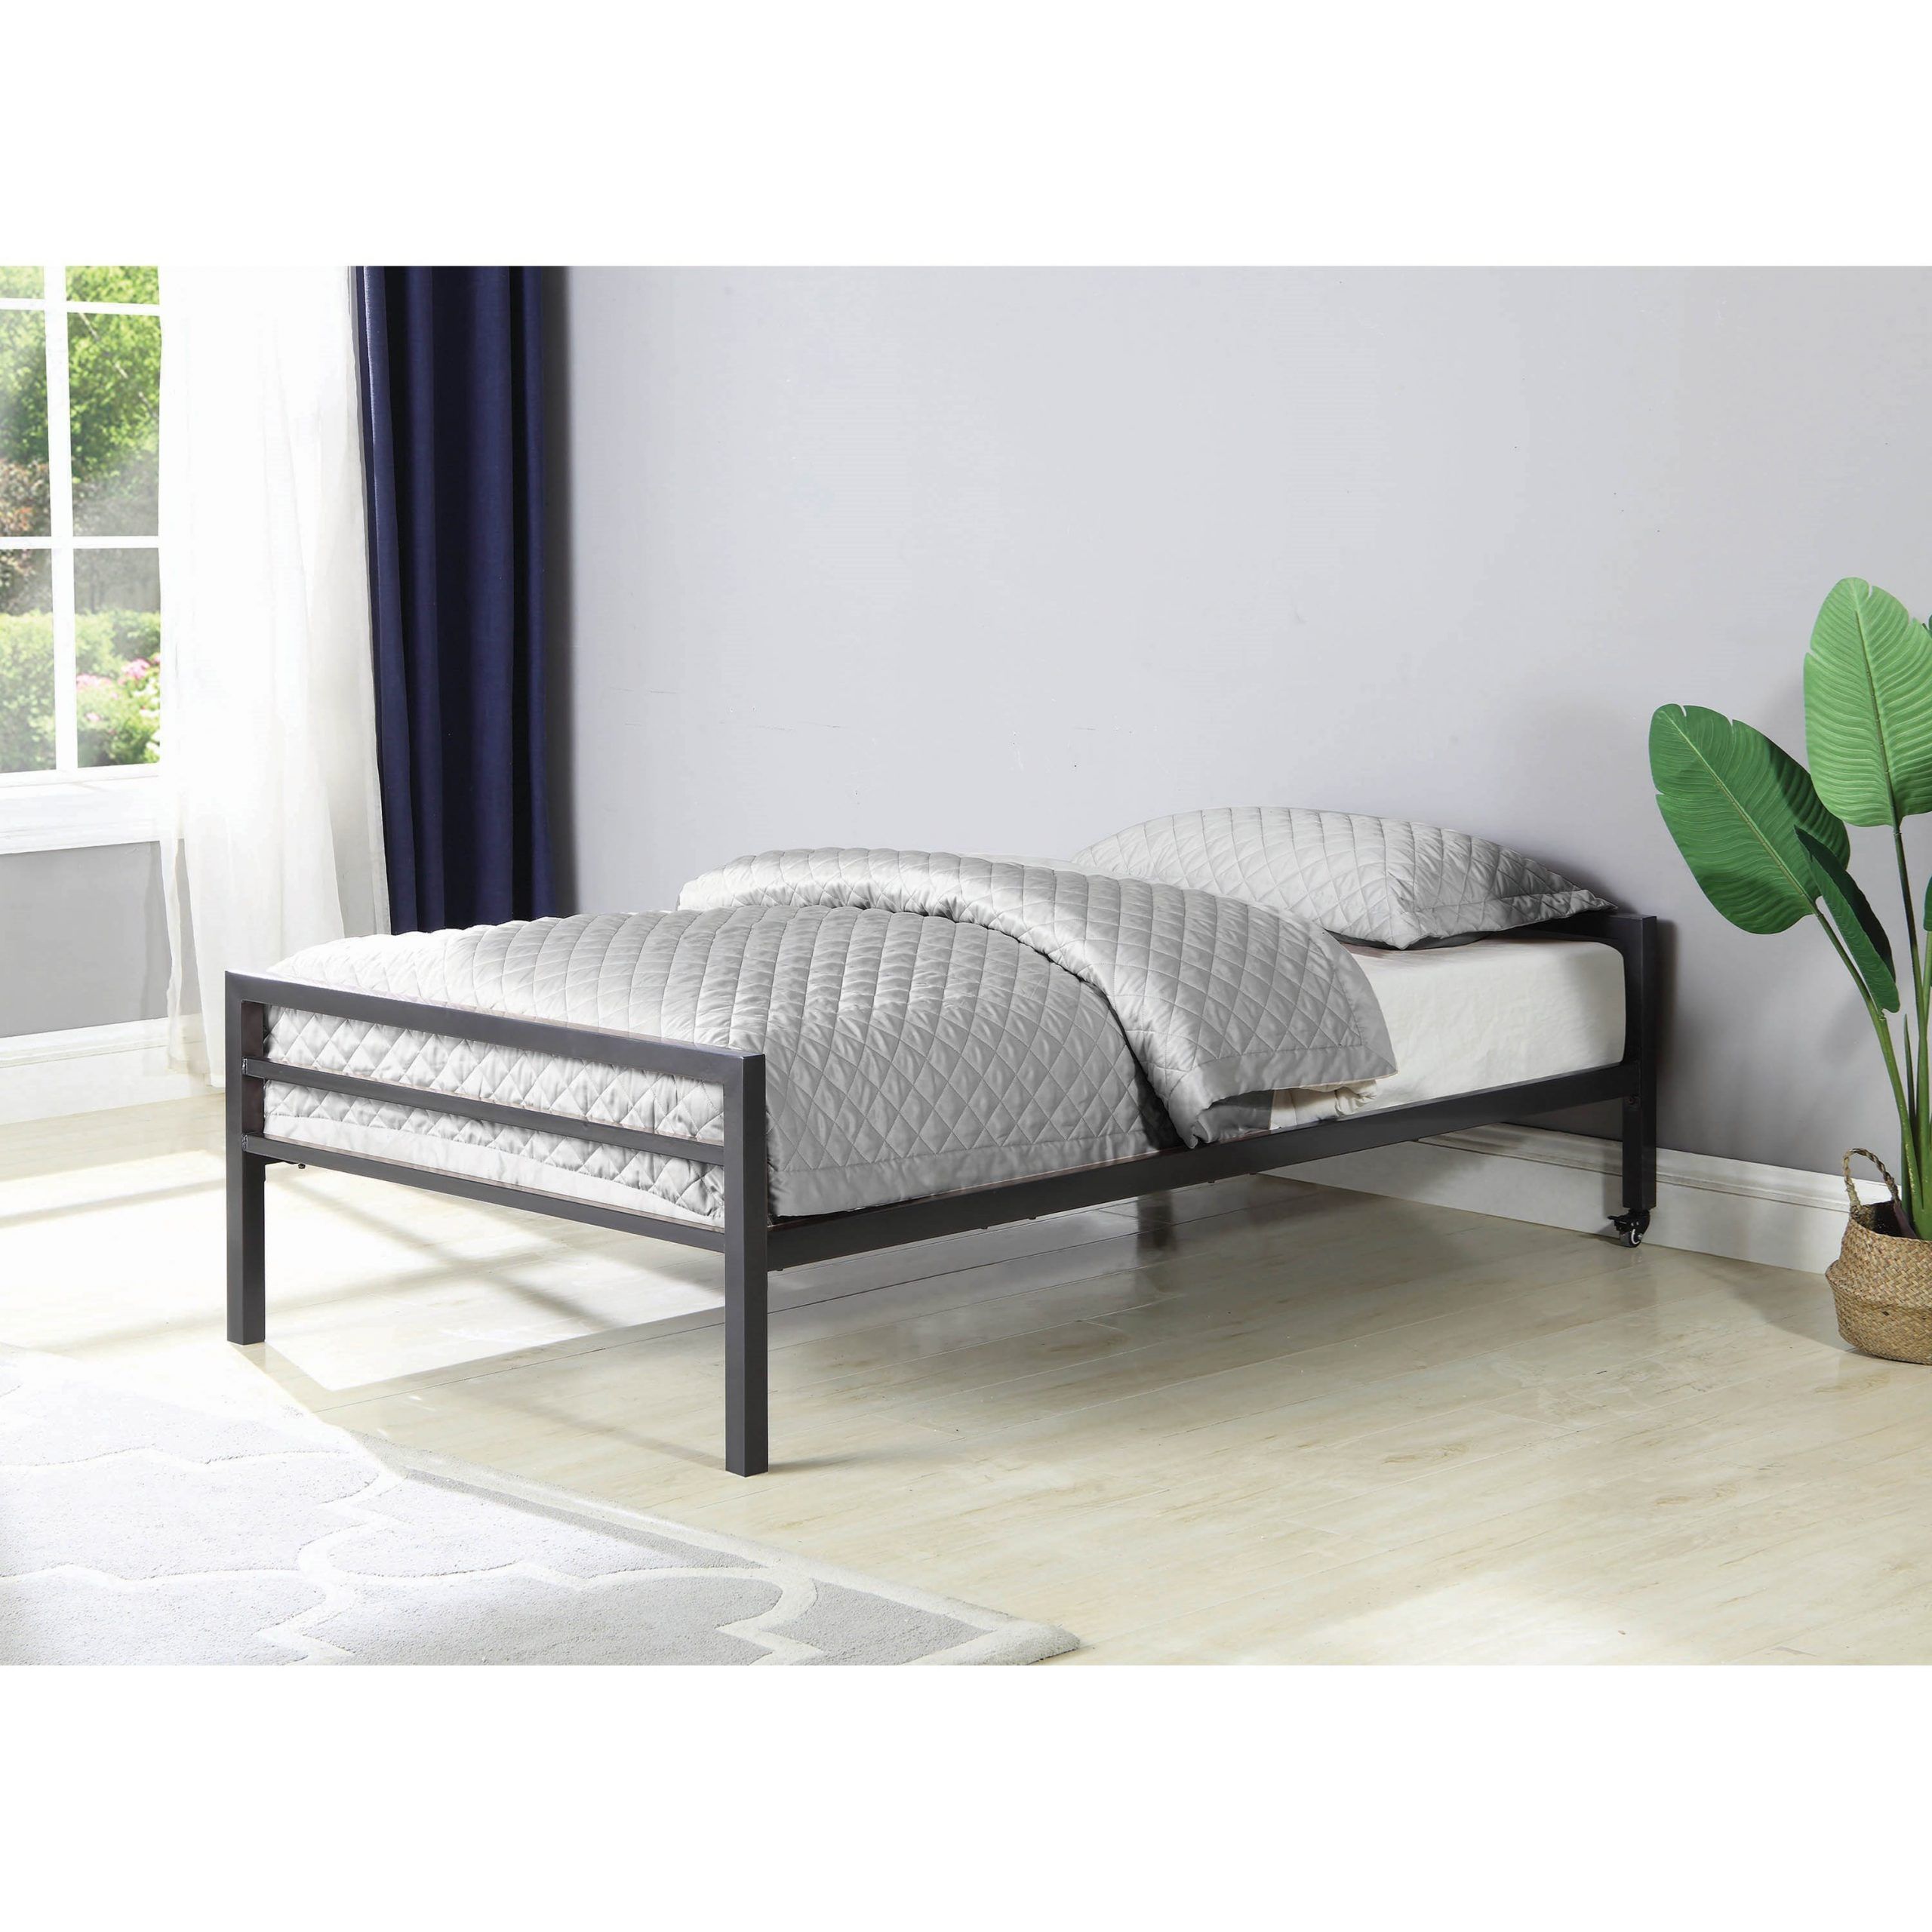 Coaster Hadley Metal Twin Bed | A1 Furniture & Mattress In Hadley Small Space Sectional Futon Sofas (Photo 12 of 15)